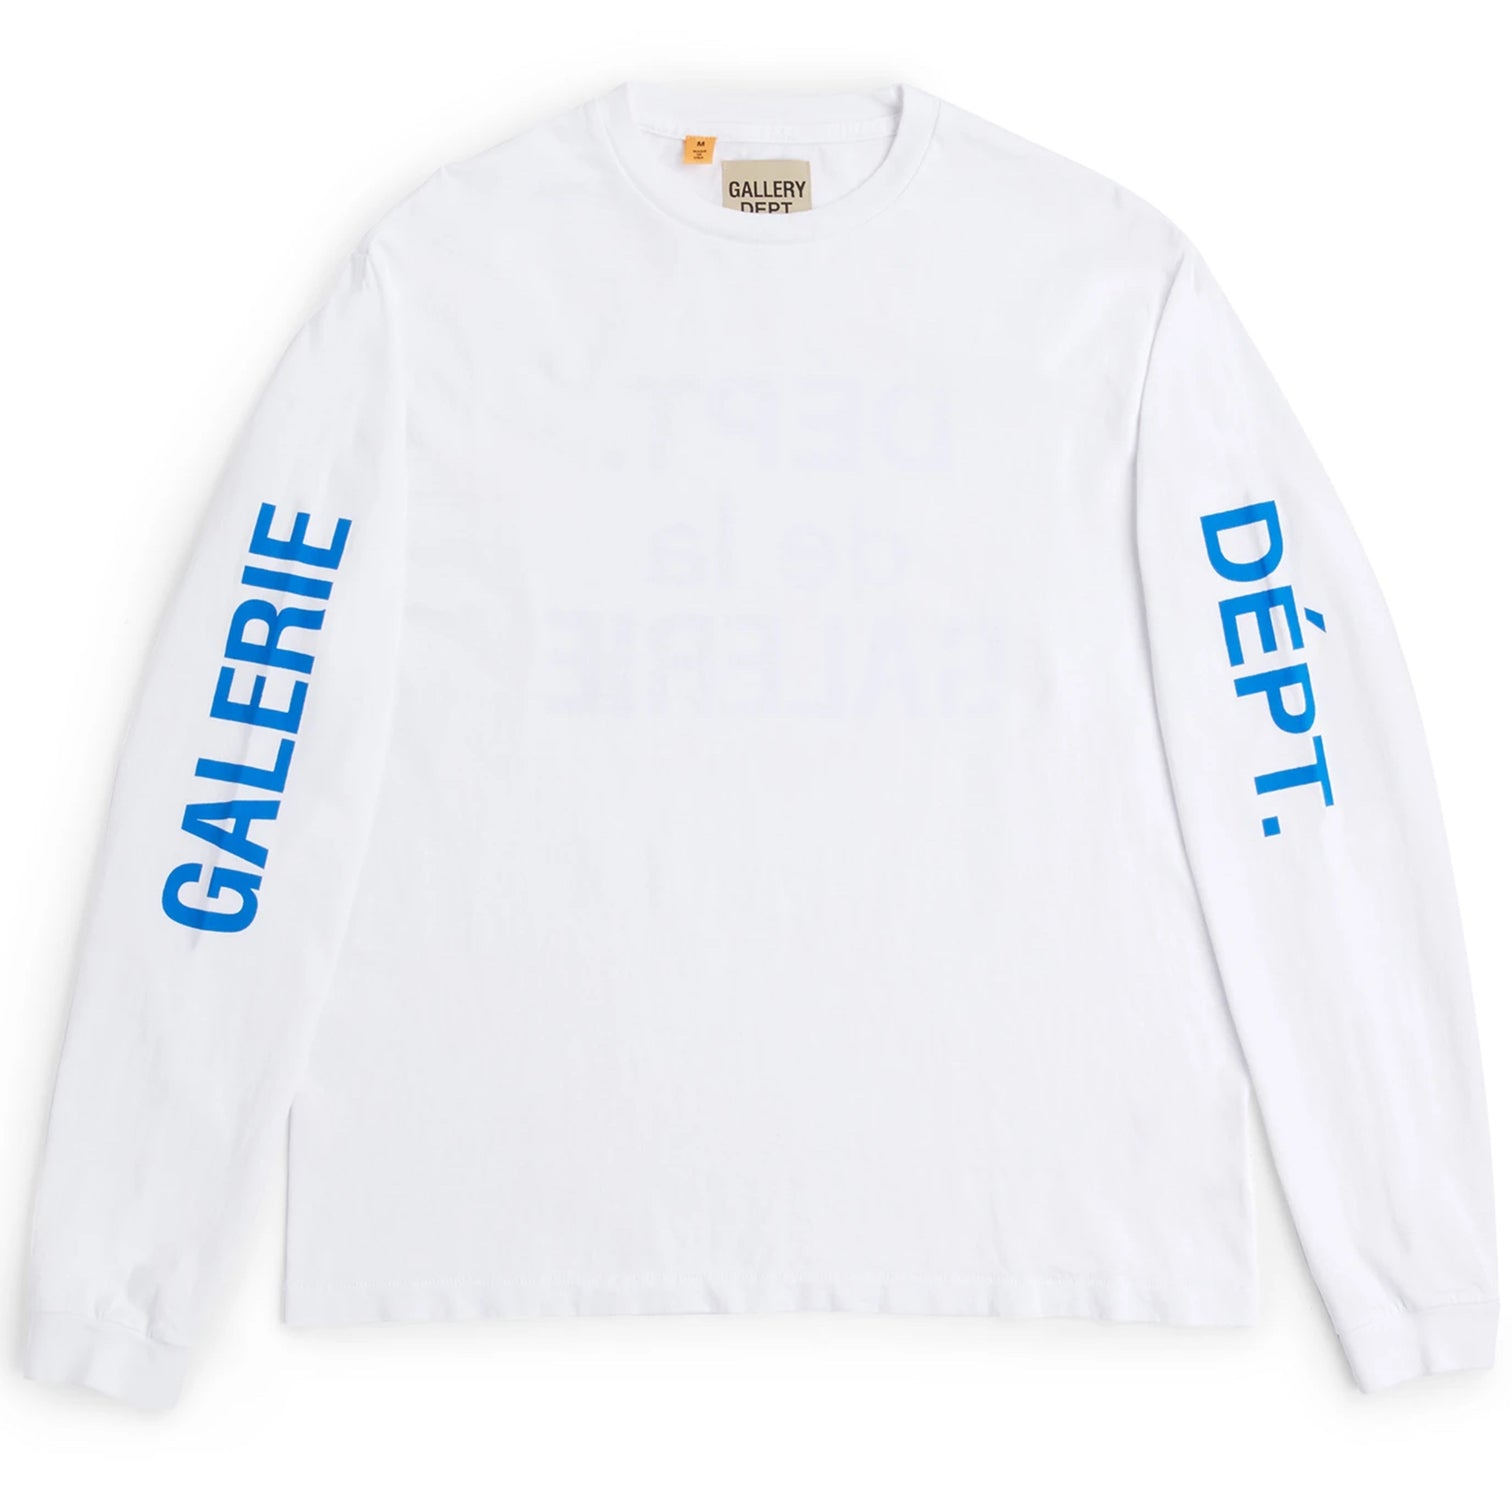 FRENCH COLLECTOR SLEEVE Dept WHITE LONG online T-SHIRT – Gallery 